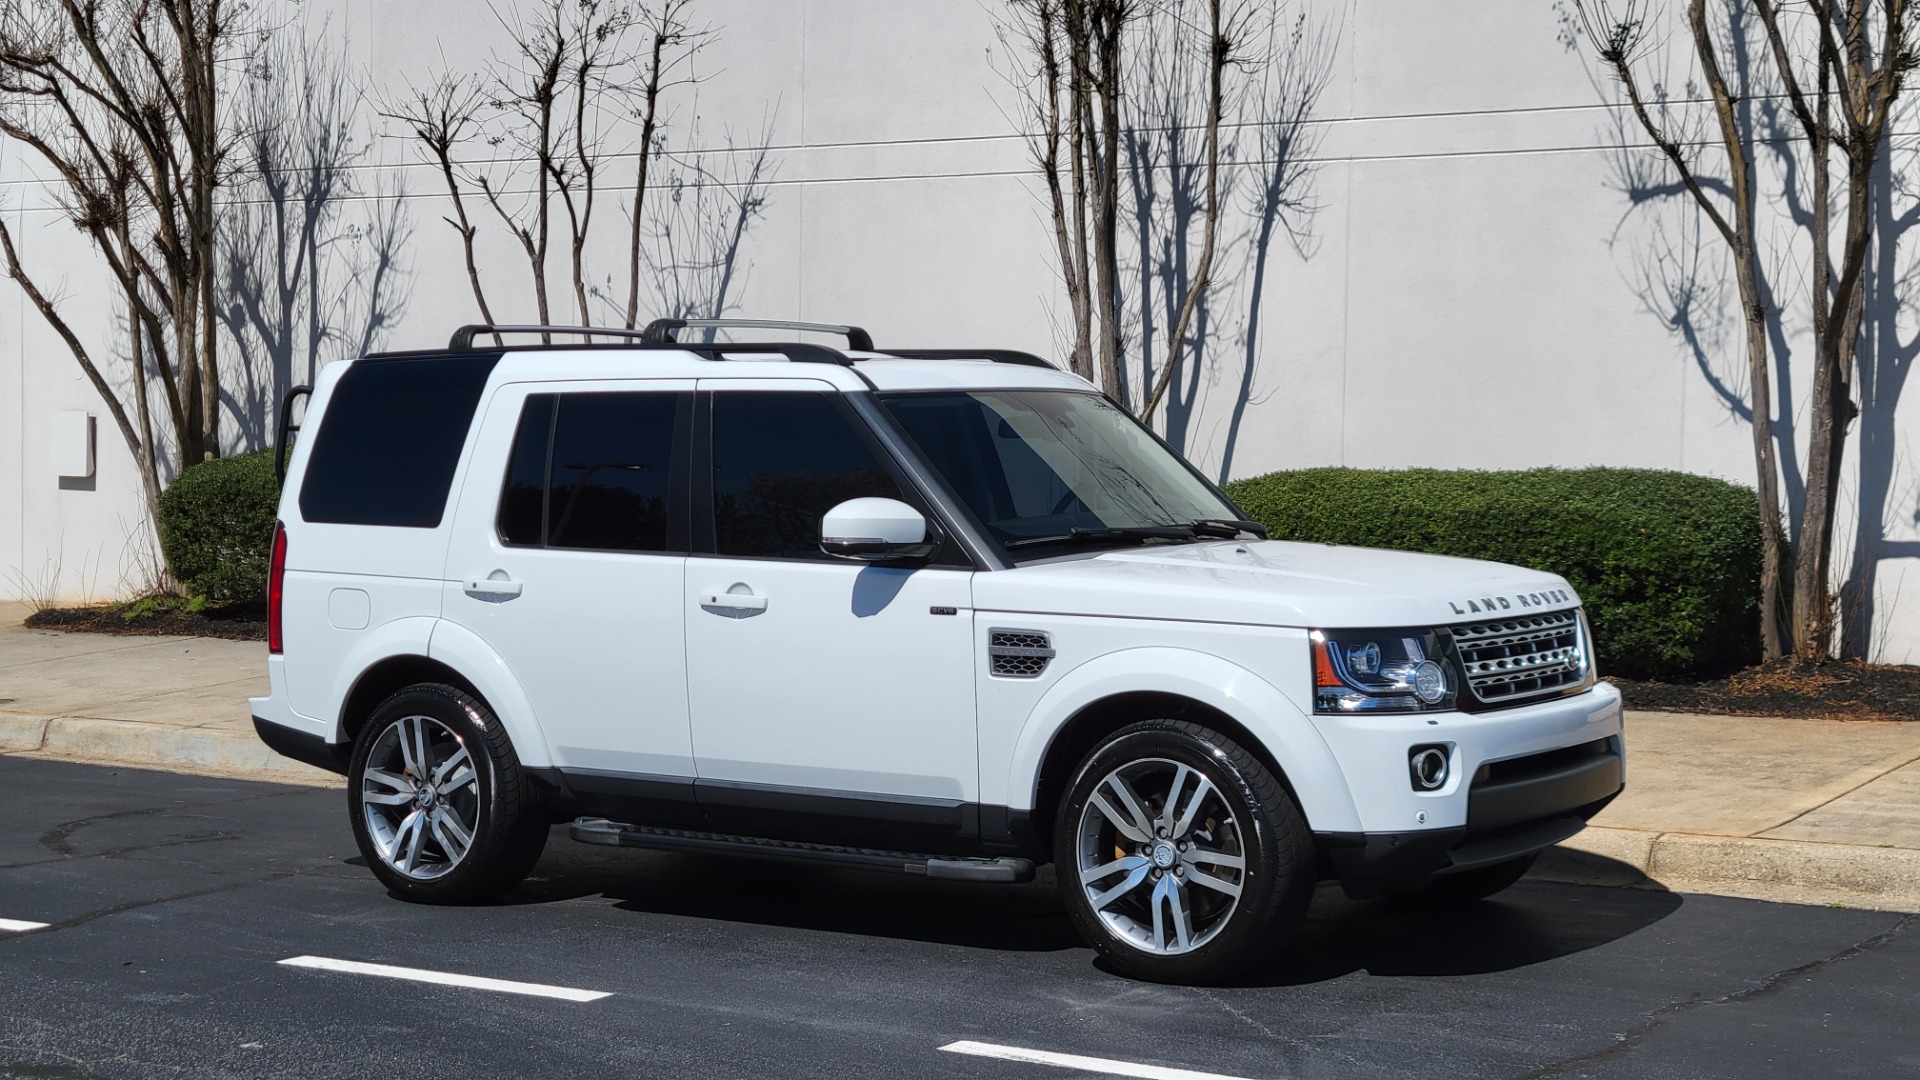 Used 2014 Land Rover LR4 HSE LUX / NAV / SUNROOF / 3-ROW / MERIDIAN / VISION ASST for sale $35,995 at Formula Imports in Charlotte NC 28227 10